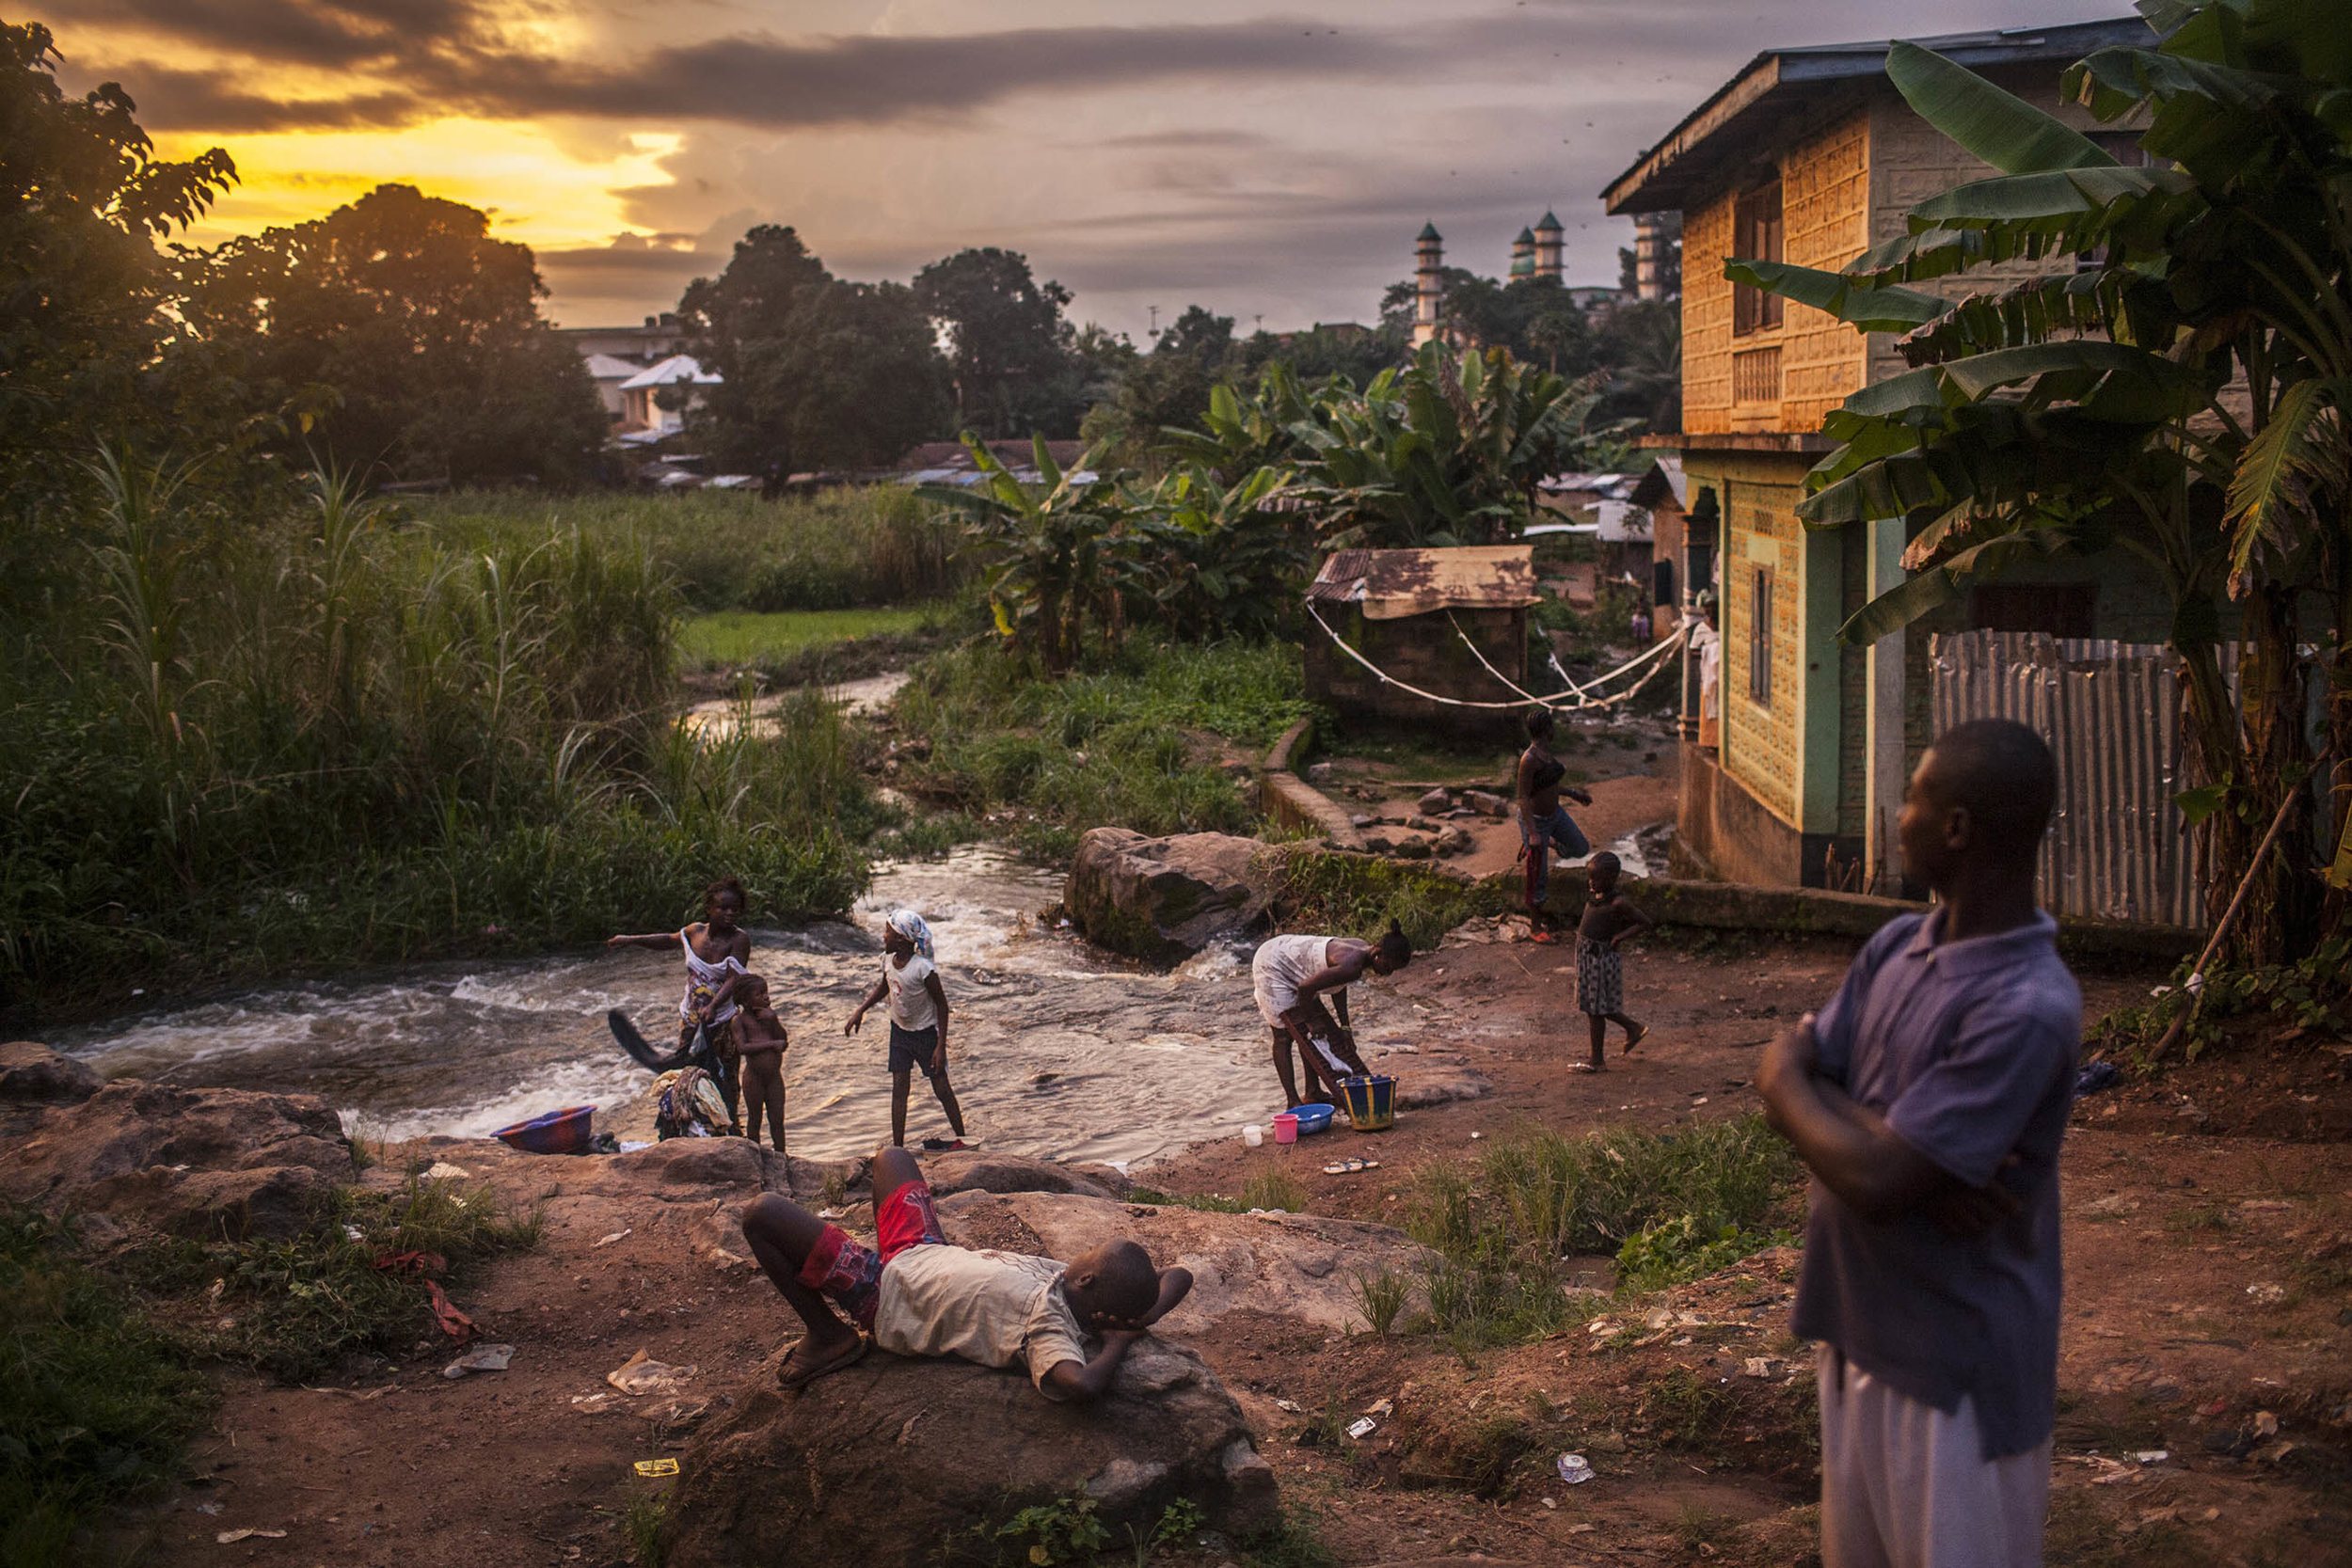  Residents of the town of Kailahun gather along a river at dusk on Tuesday, August 19, 2014. At the time, Kailahun district, in eastern Sierra Leone, was the most heavily affected by the ongoing Ebola outbreak, which originated across the nearby bord